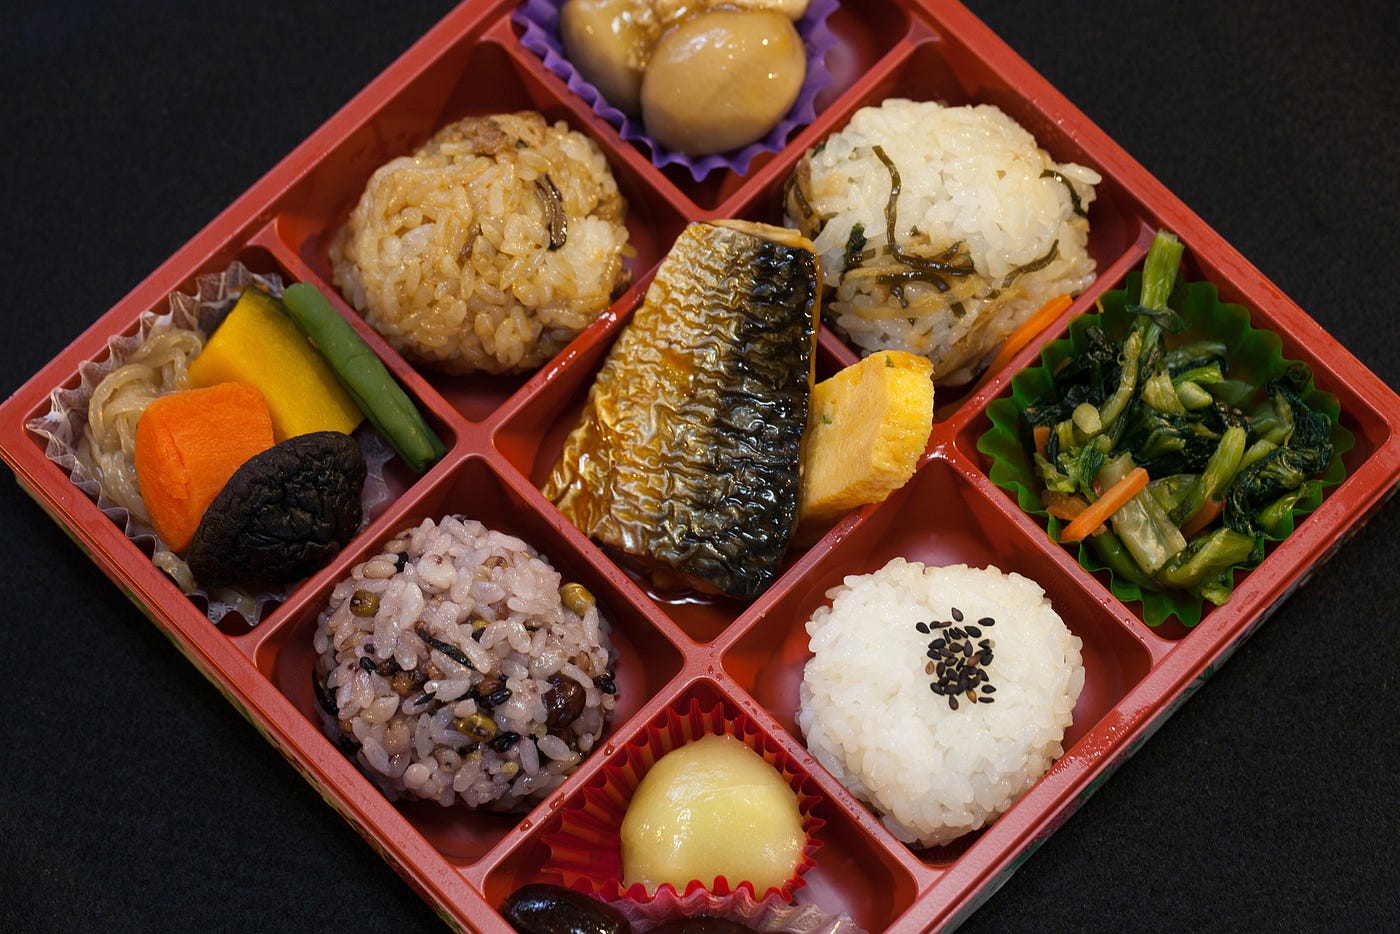 The controversial history of the bento box, by Stephanie Buck